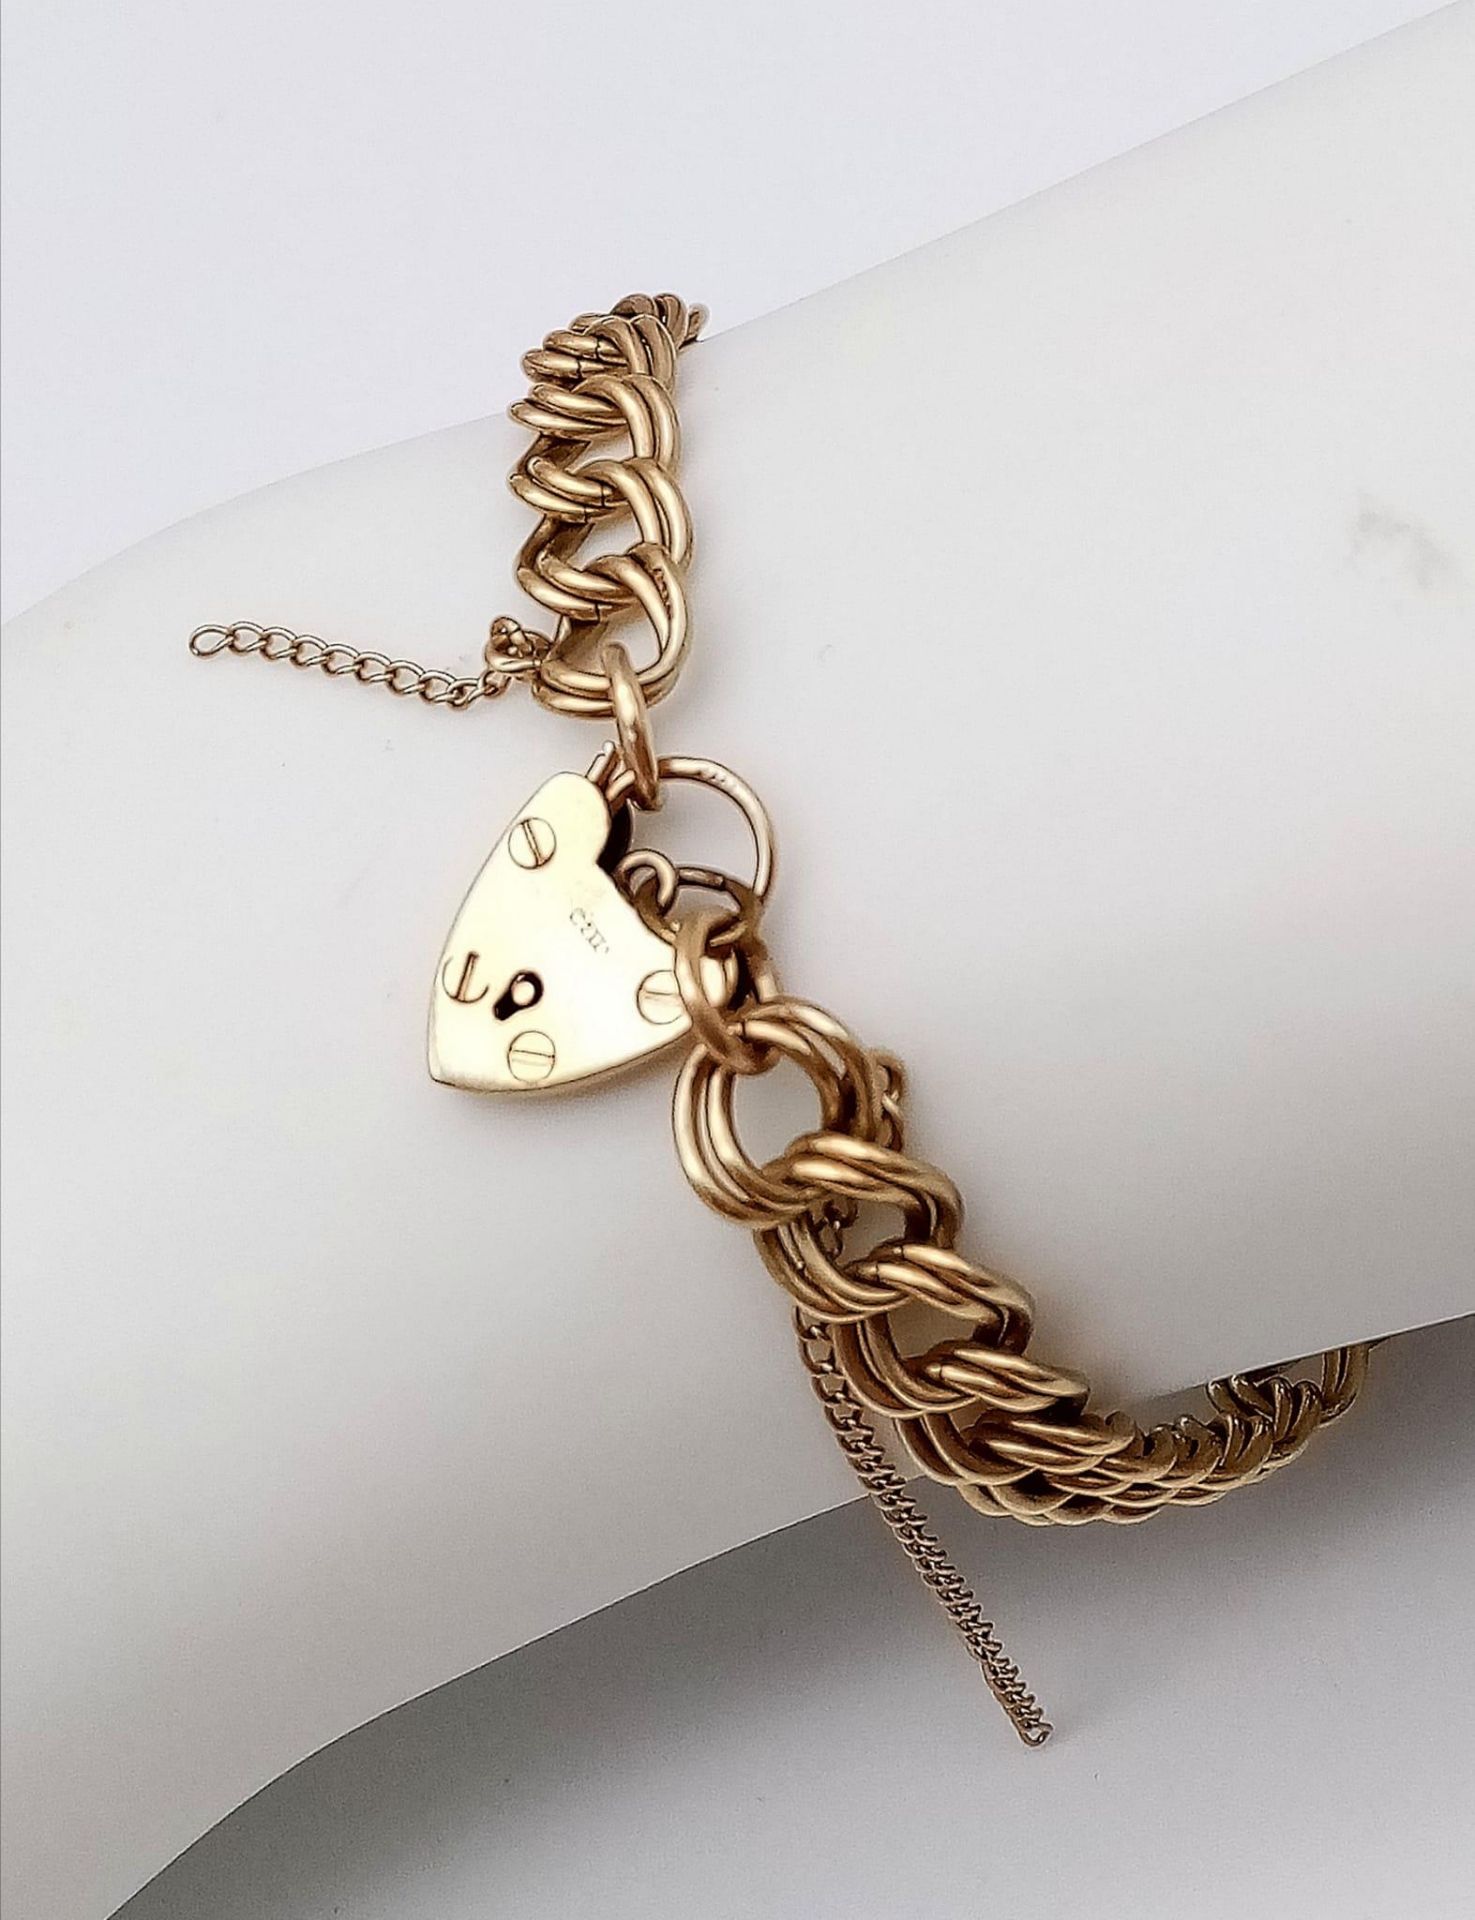 A Vintage 9K Yellow Gold Double Curb Link Bracelet with Heart Clasp. 17cm. 13.54g weight. - Image 6 of 6